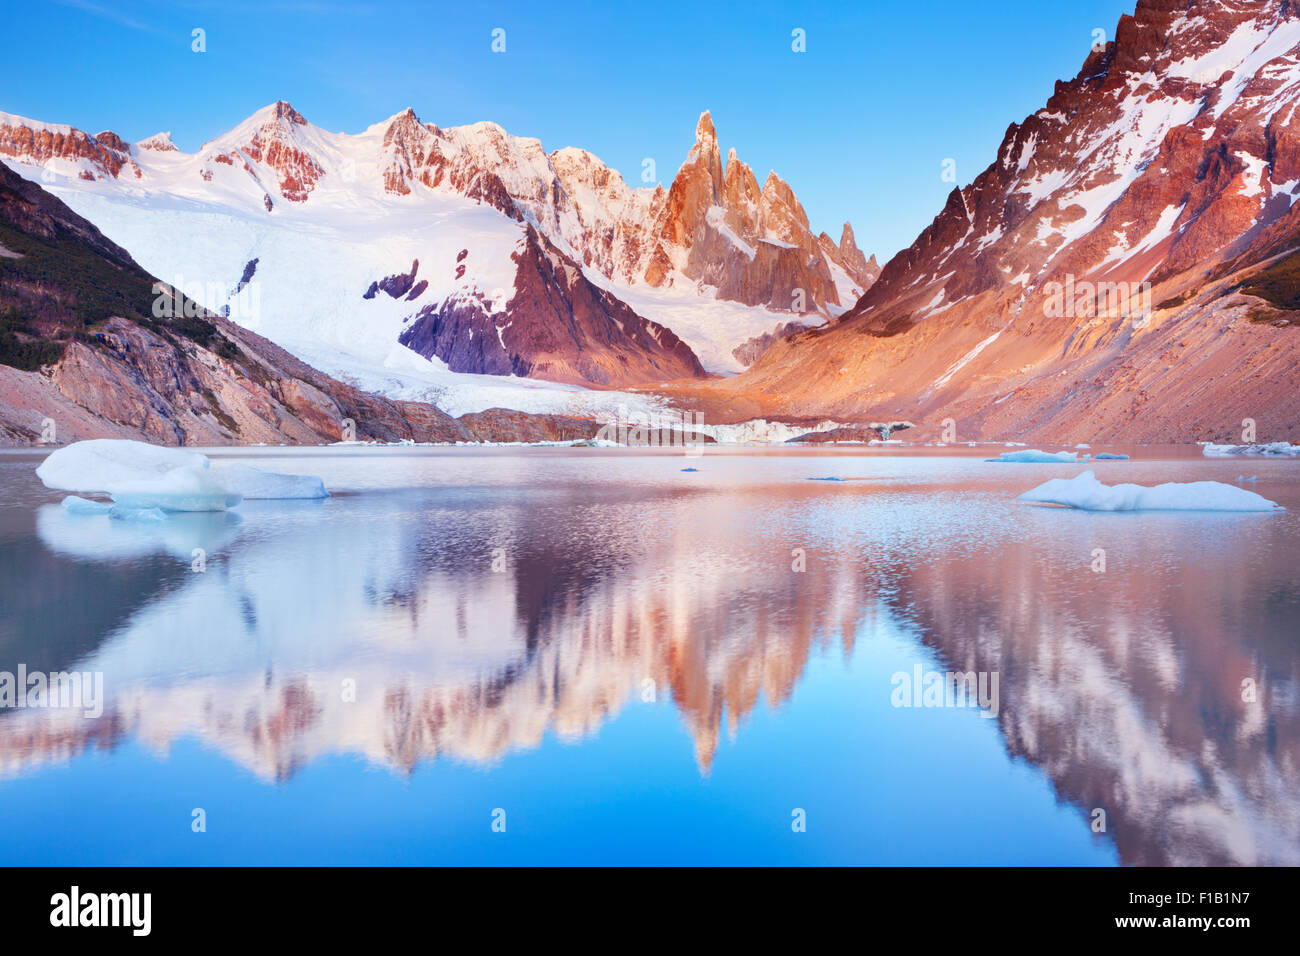 The peaks of Cerro Torre in Argentinian Patagonia reflected in the lake below. Photographed at sunrise. Stock Photo